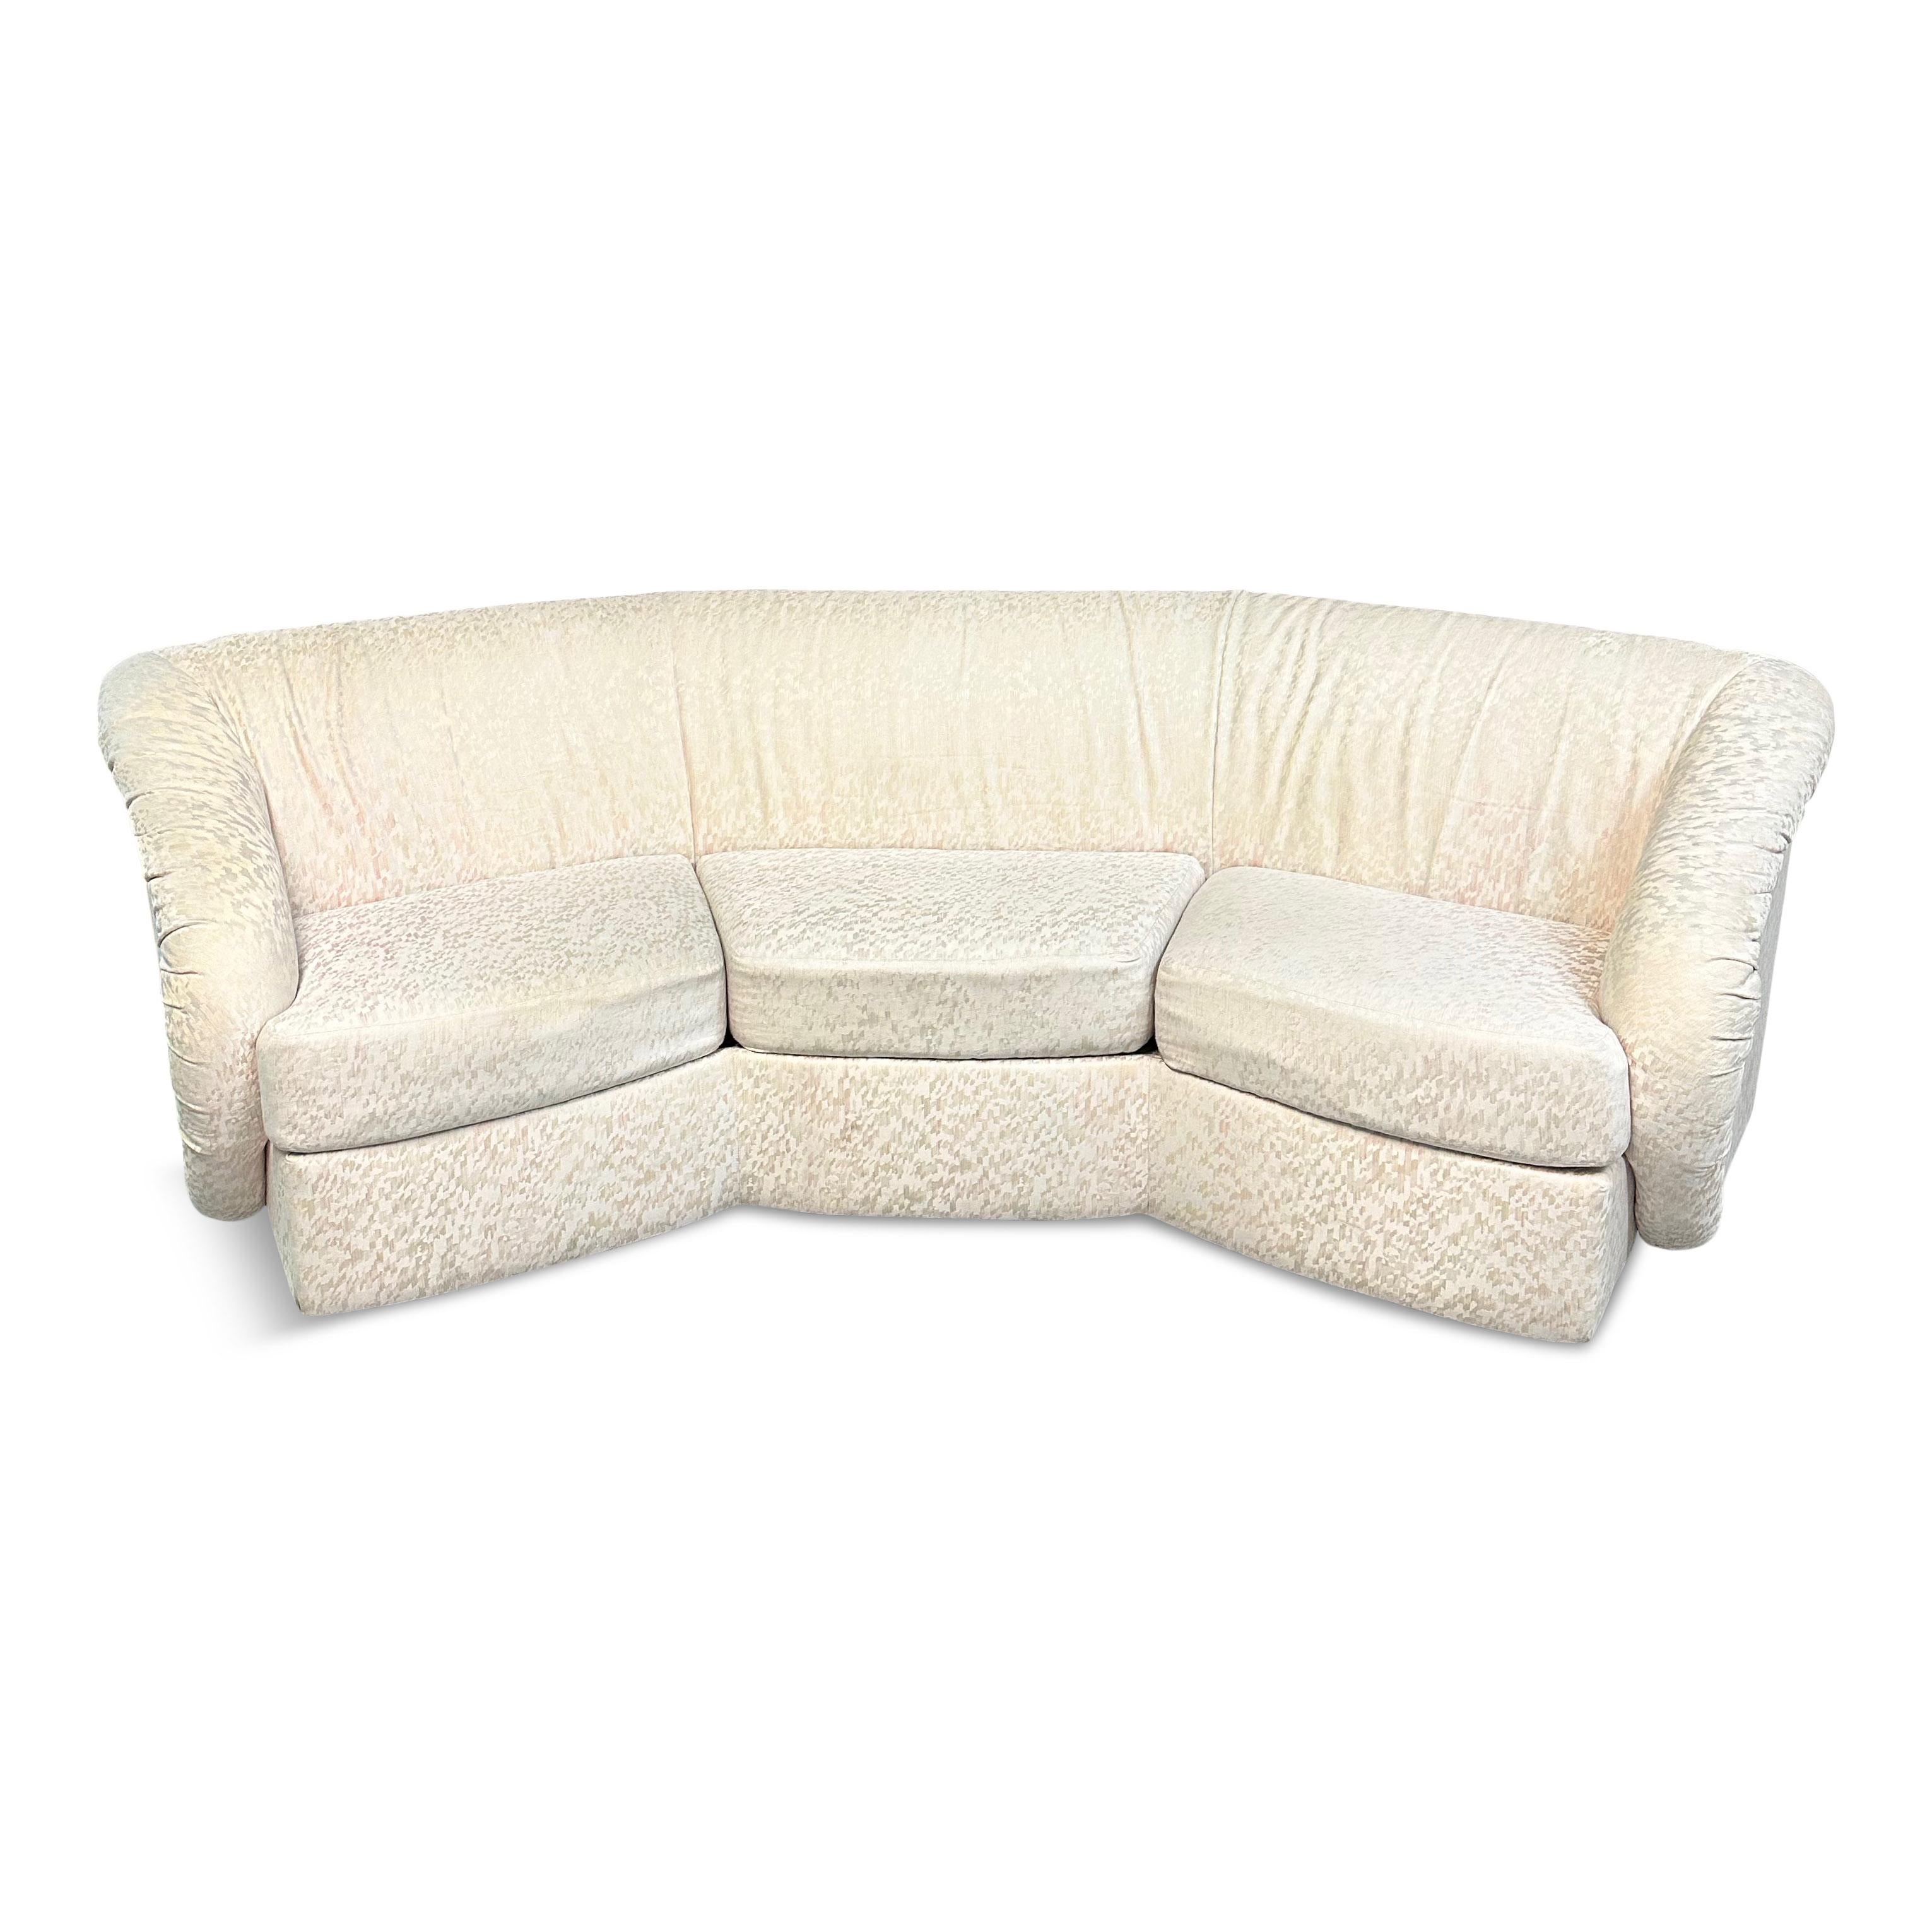 This pair of mid-century modern sofas offers a distinctive silhouette with its curved octagonal shape and sculptural arms. Inspired by 1980s design, these pieces are an excellent choice for those who want to add style to any living room.

These